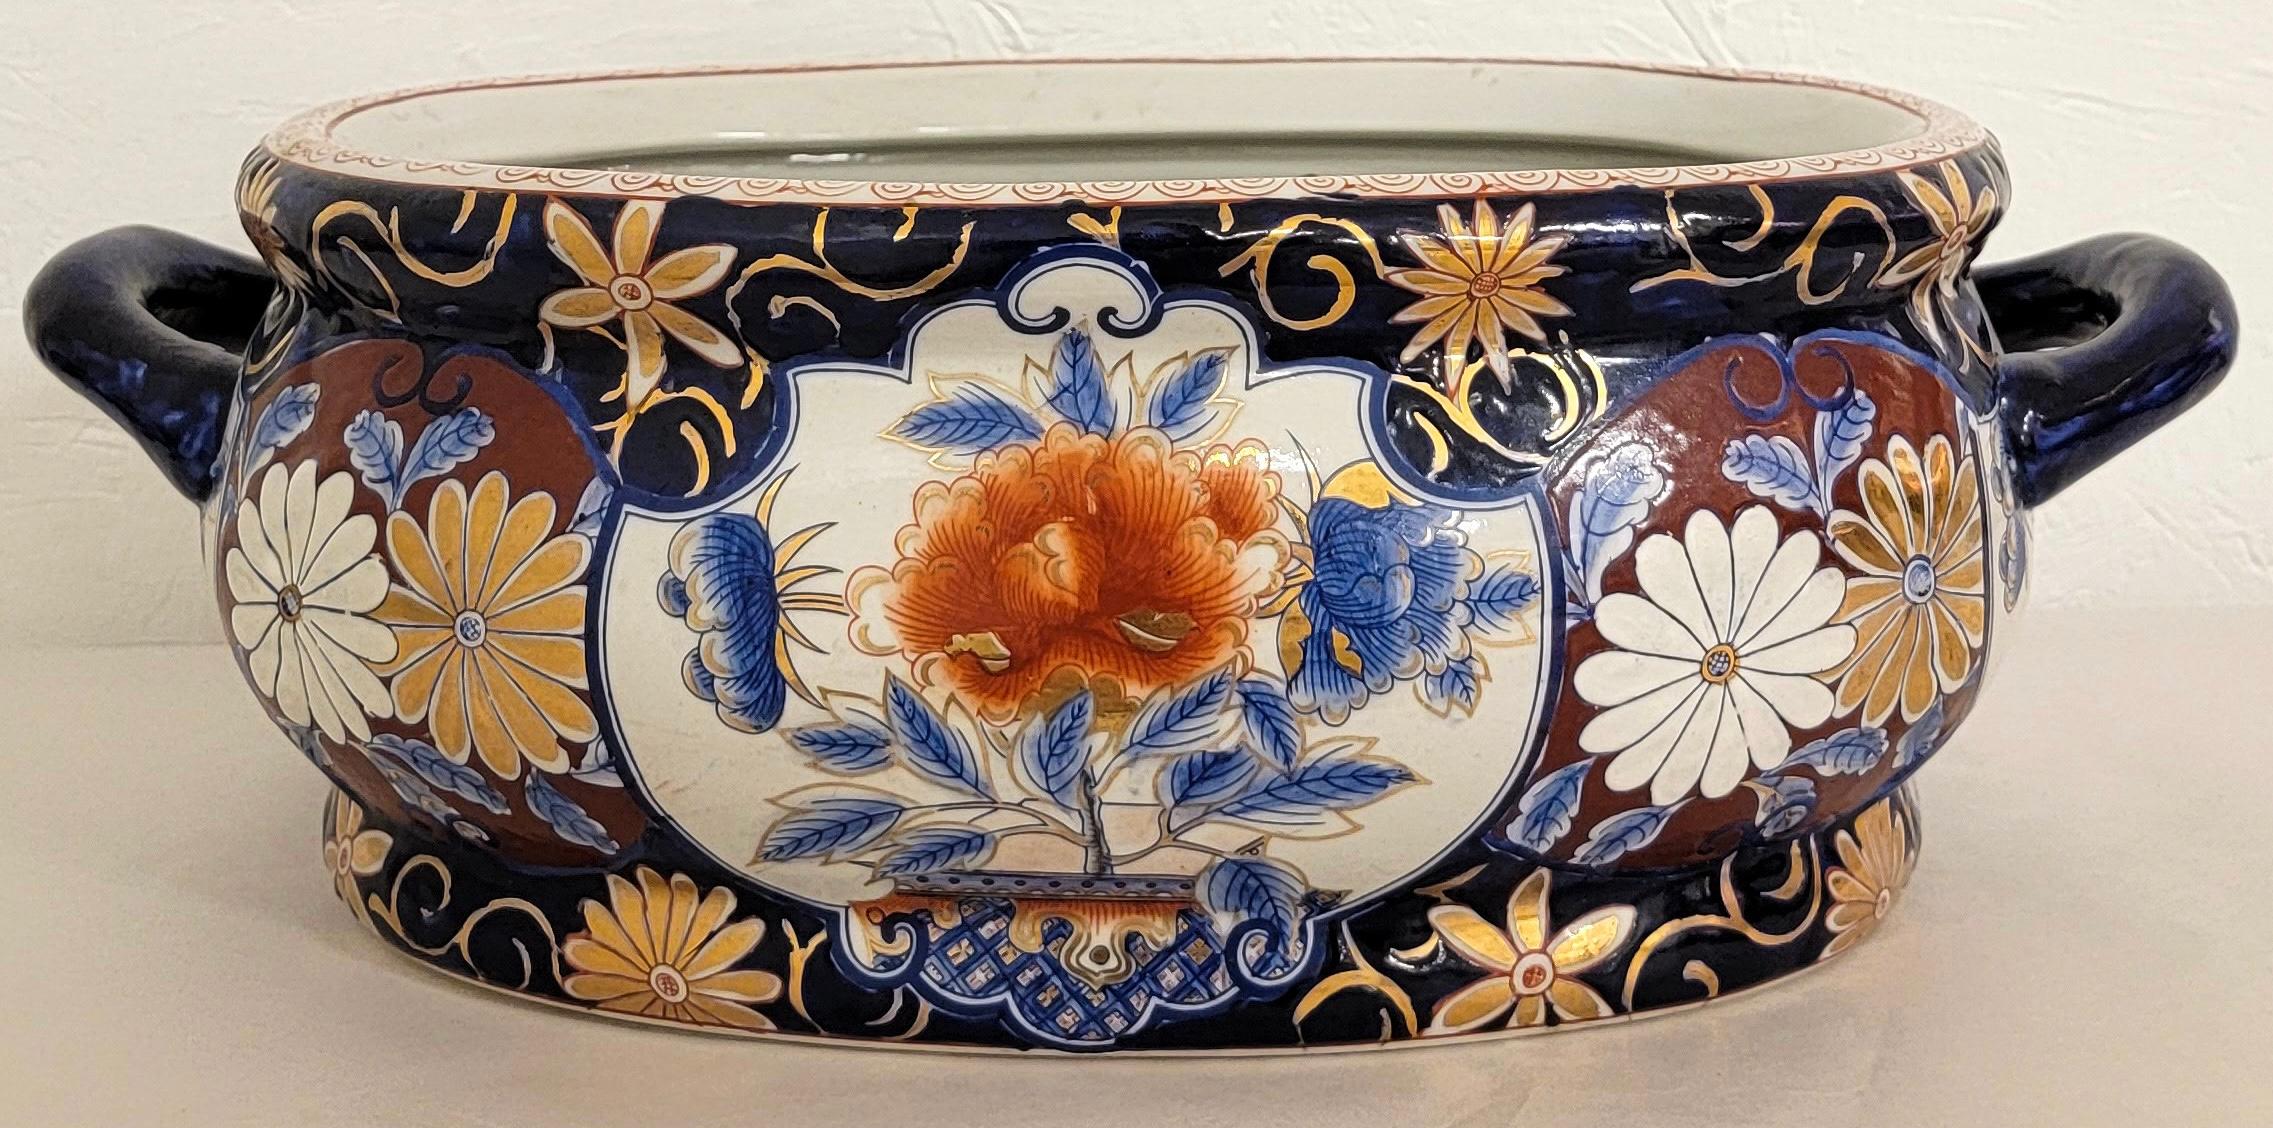 Great for gifting or home decor! This is a lovely Chinese Export style footbath. It is hand painted and has gilt accents. Note the interior fish!